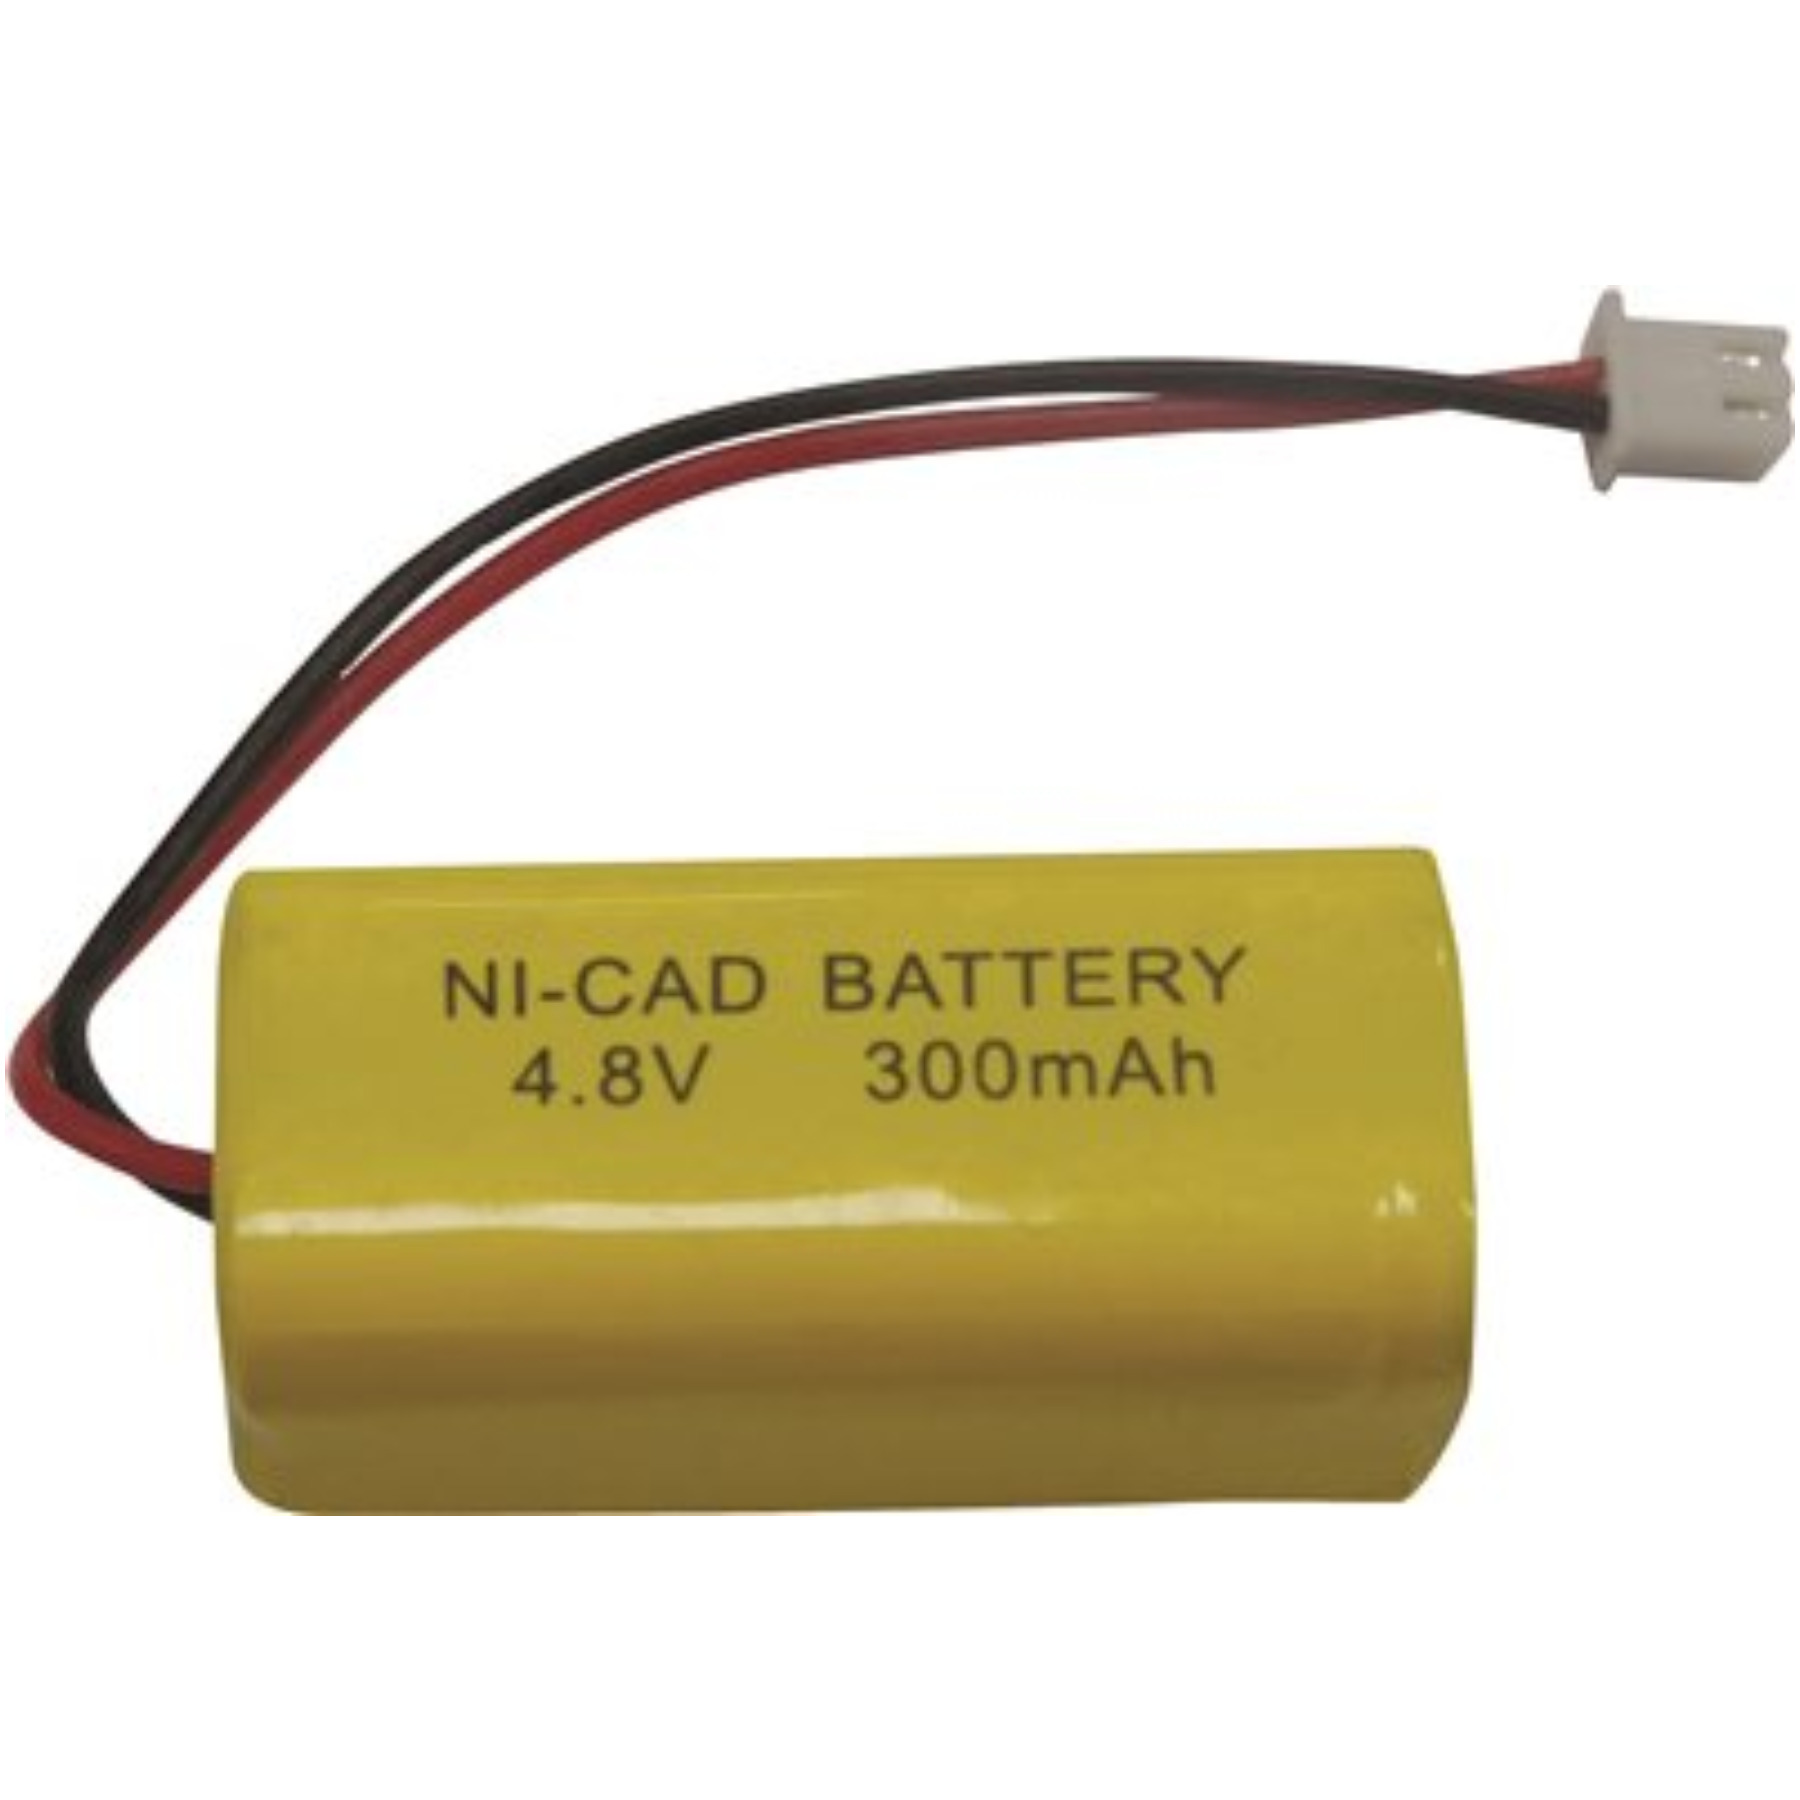 MONUMENT EXIT SIGN REPLACEMENT RECHARGEABLE NICAD BATTERY, 4.8 VOLT, 300MAH